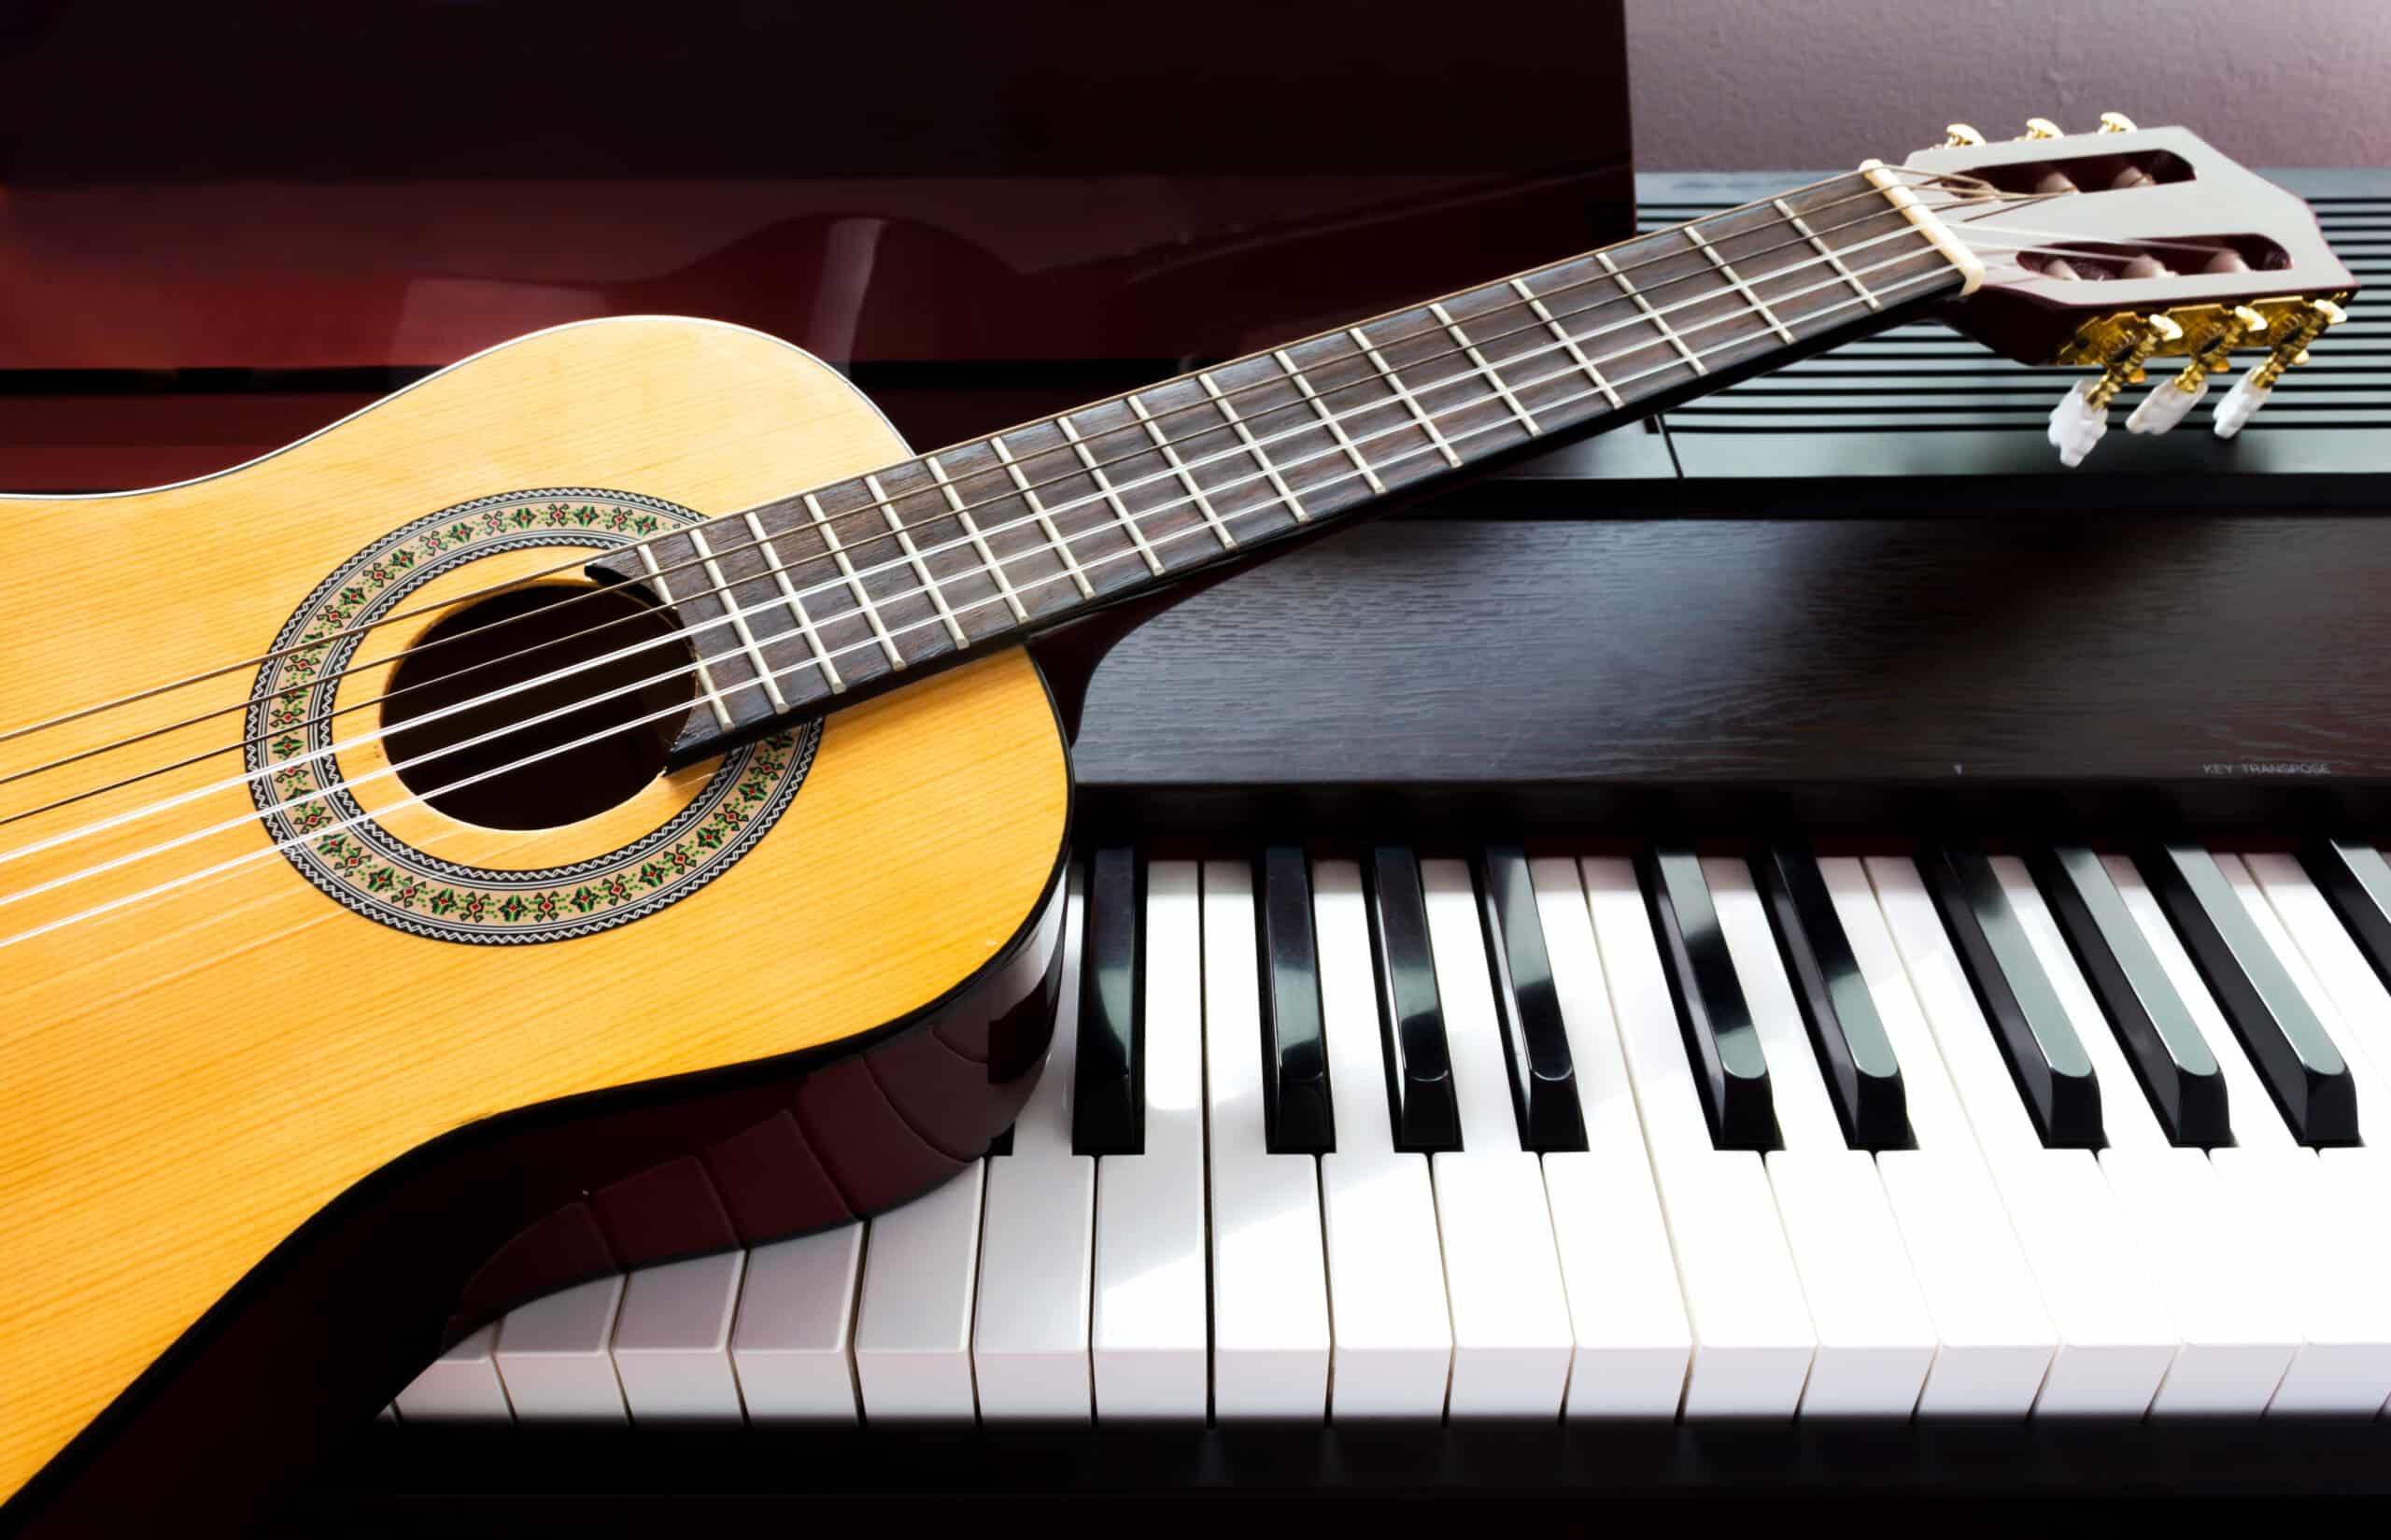 Which Is Easier To Learn: Piano Or Guitar